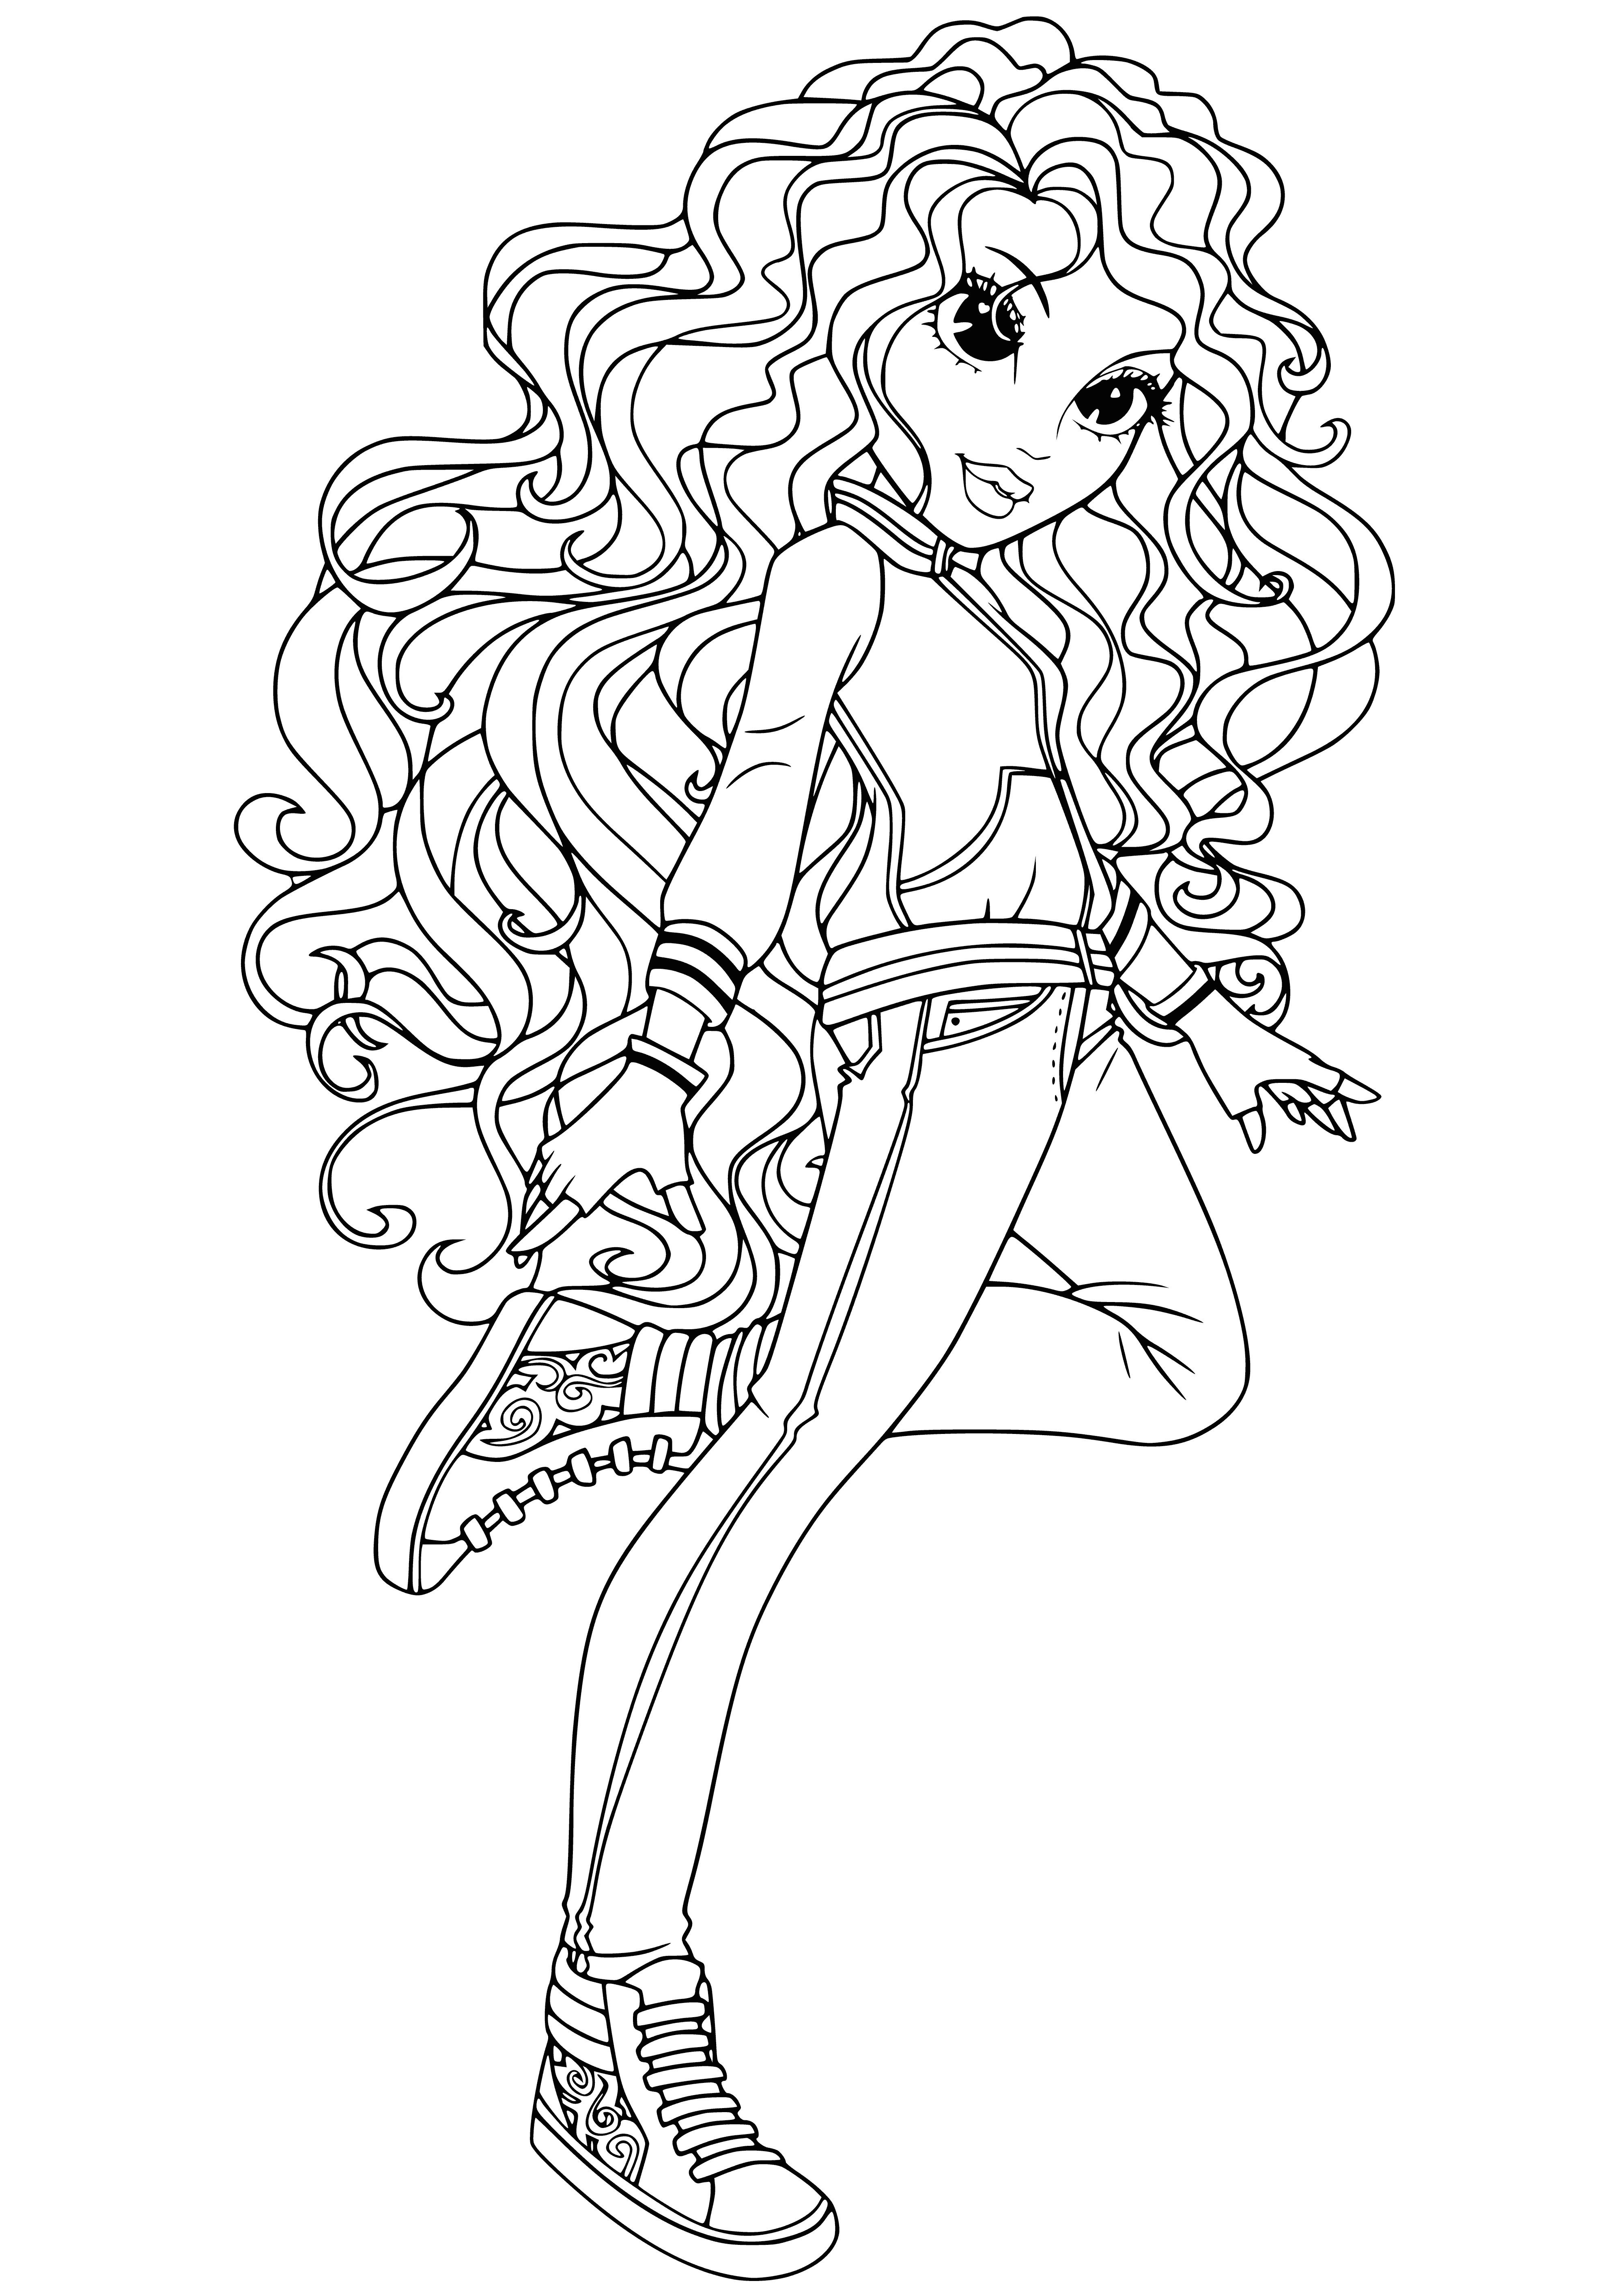 coloring page: Brave Bria is loyal to family and friends, standing up for what she believes in. #MoxieGirl